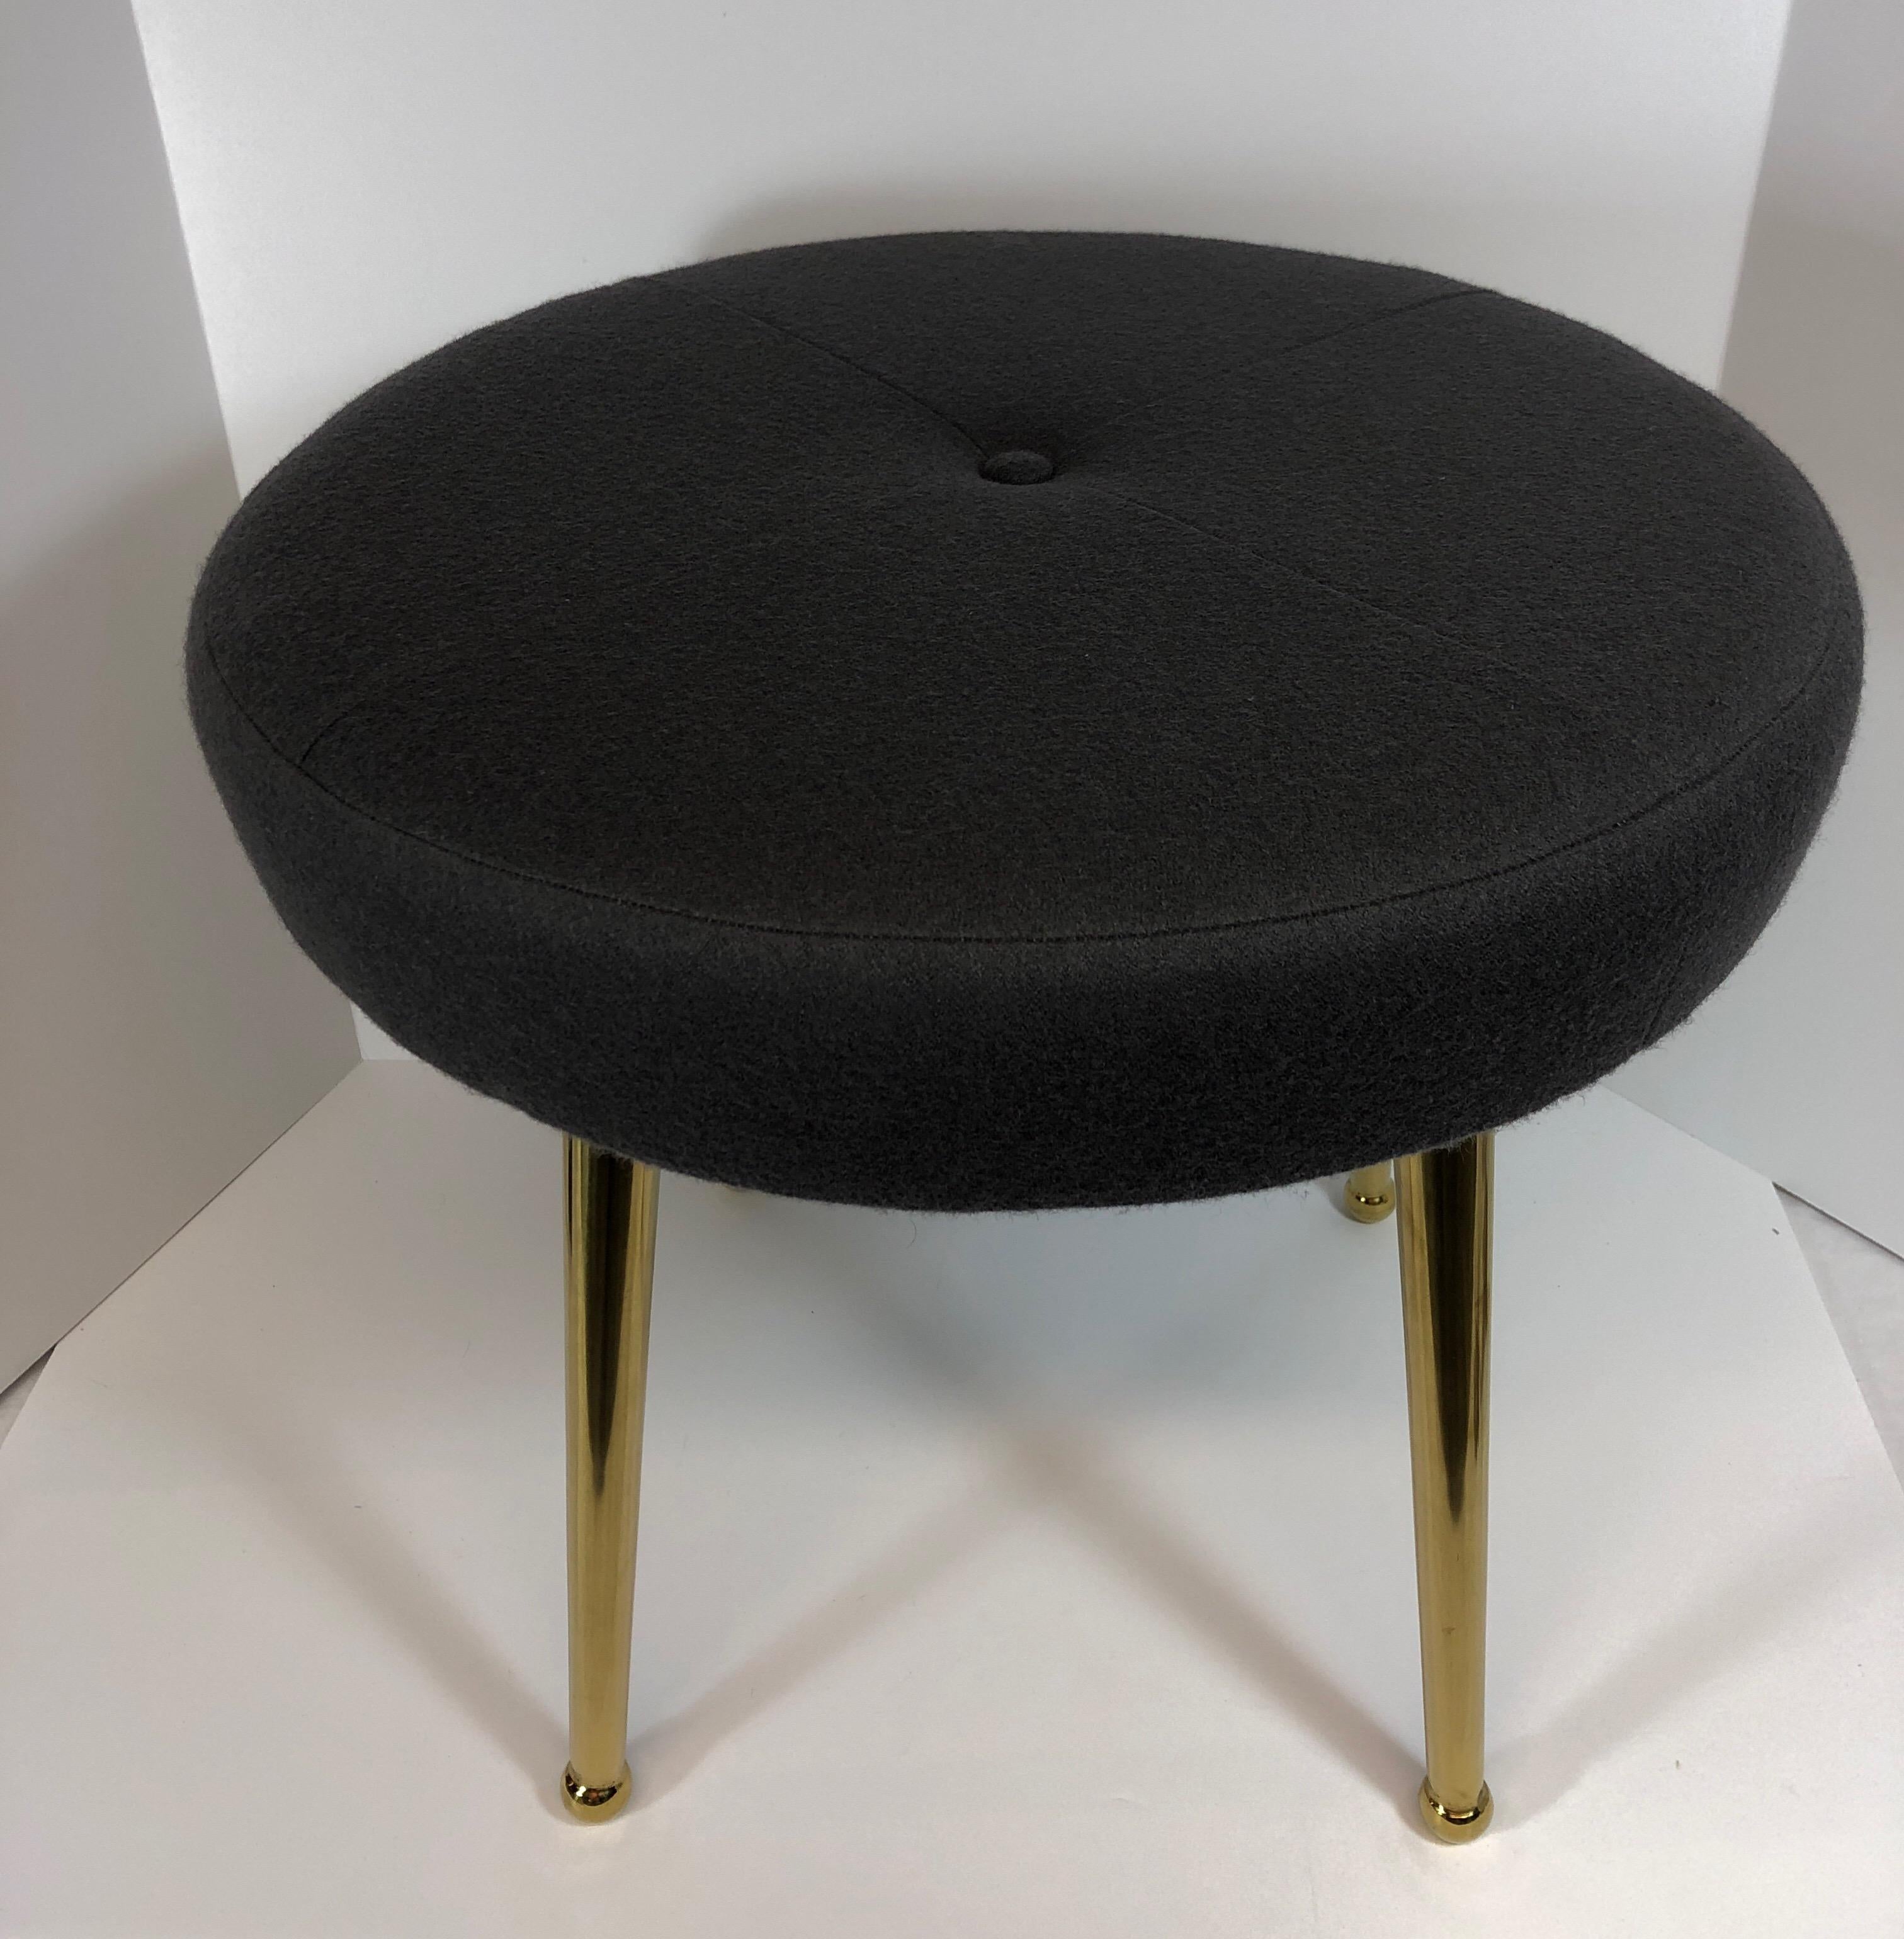 Custom Pointe' leg bench or stool, shown in 18” diameter with brass legs with button and seaming. Available in any size or shape custom made to order COM/COL. Legs can be brass or stainless steel, polished or satin finish. Priced according to spec.